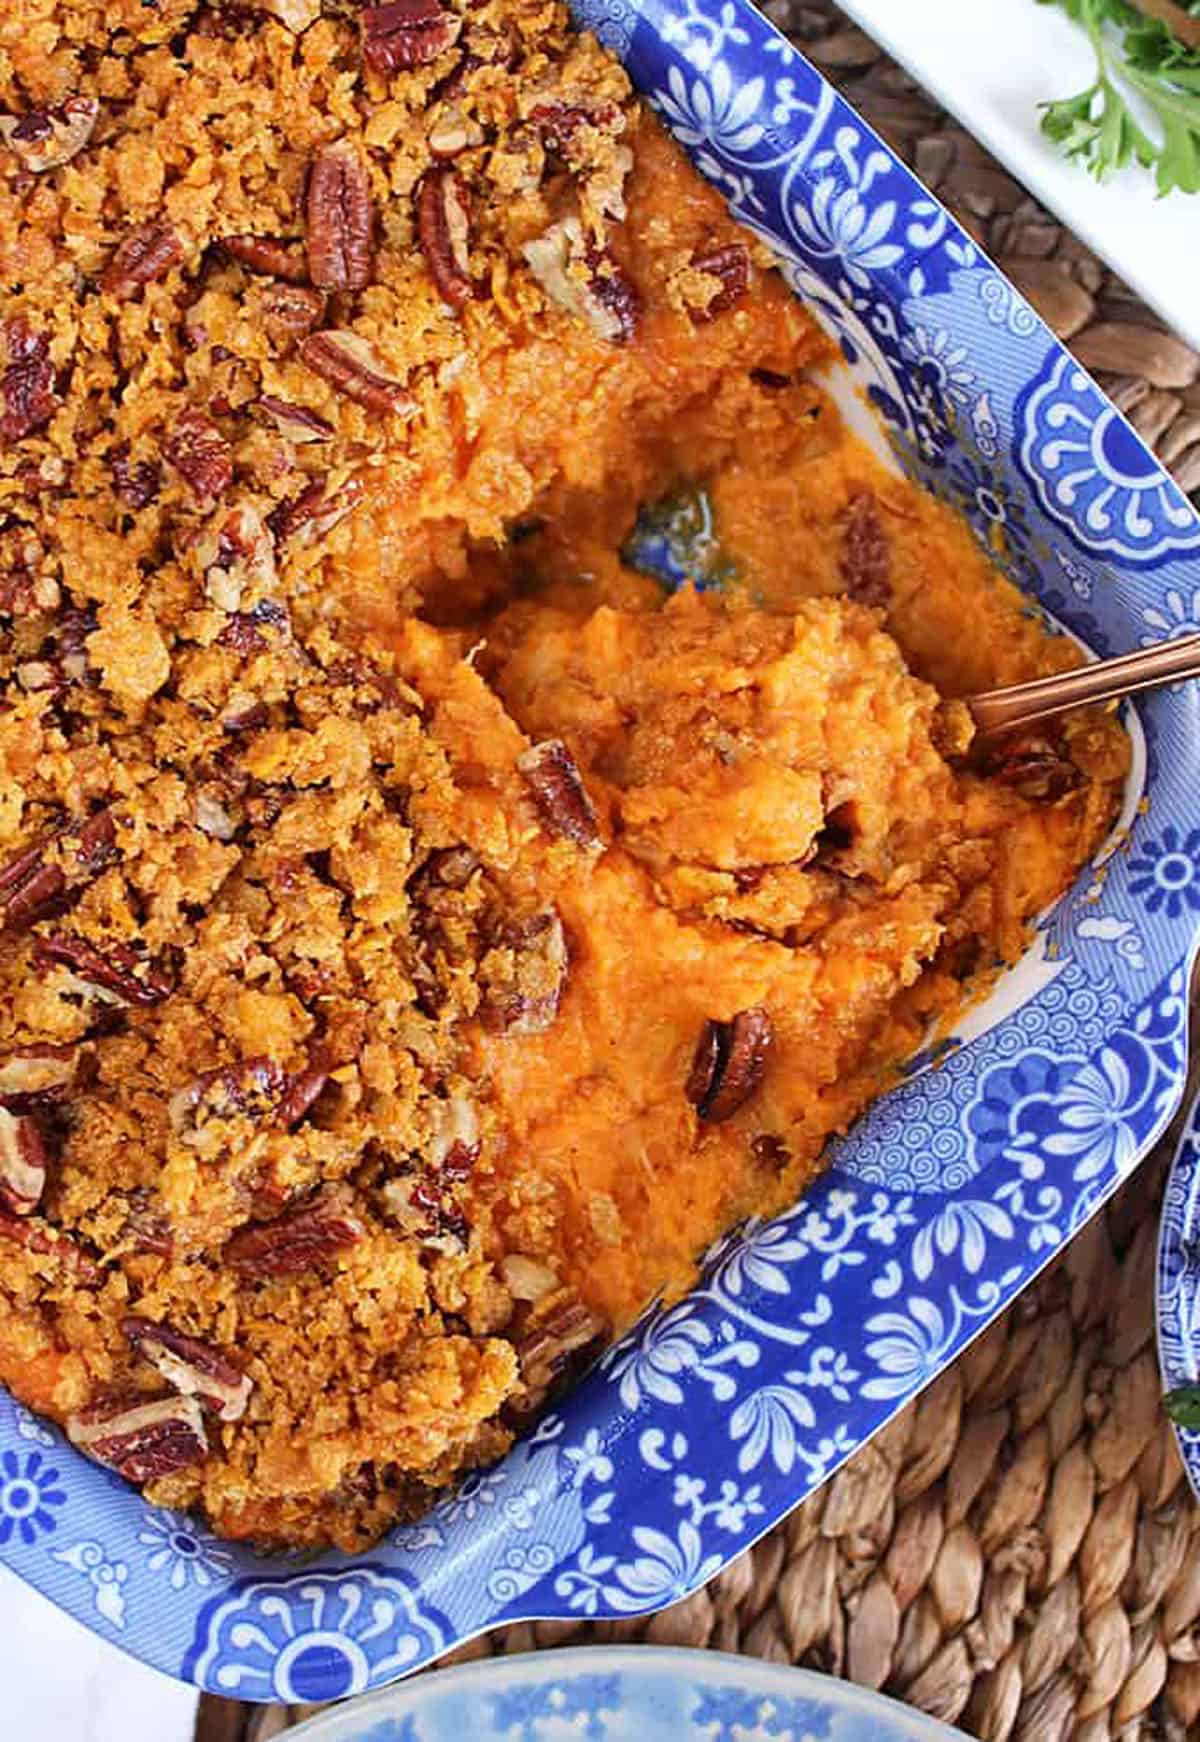 sweet potato casserole in a blue and white baking dish on a woven placemat.